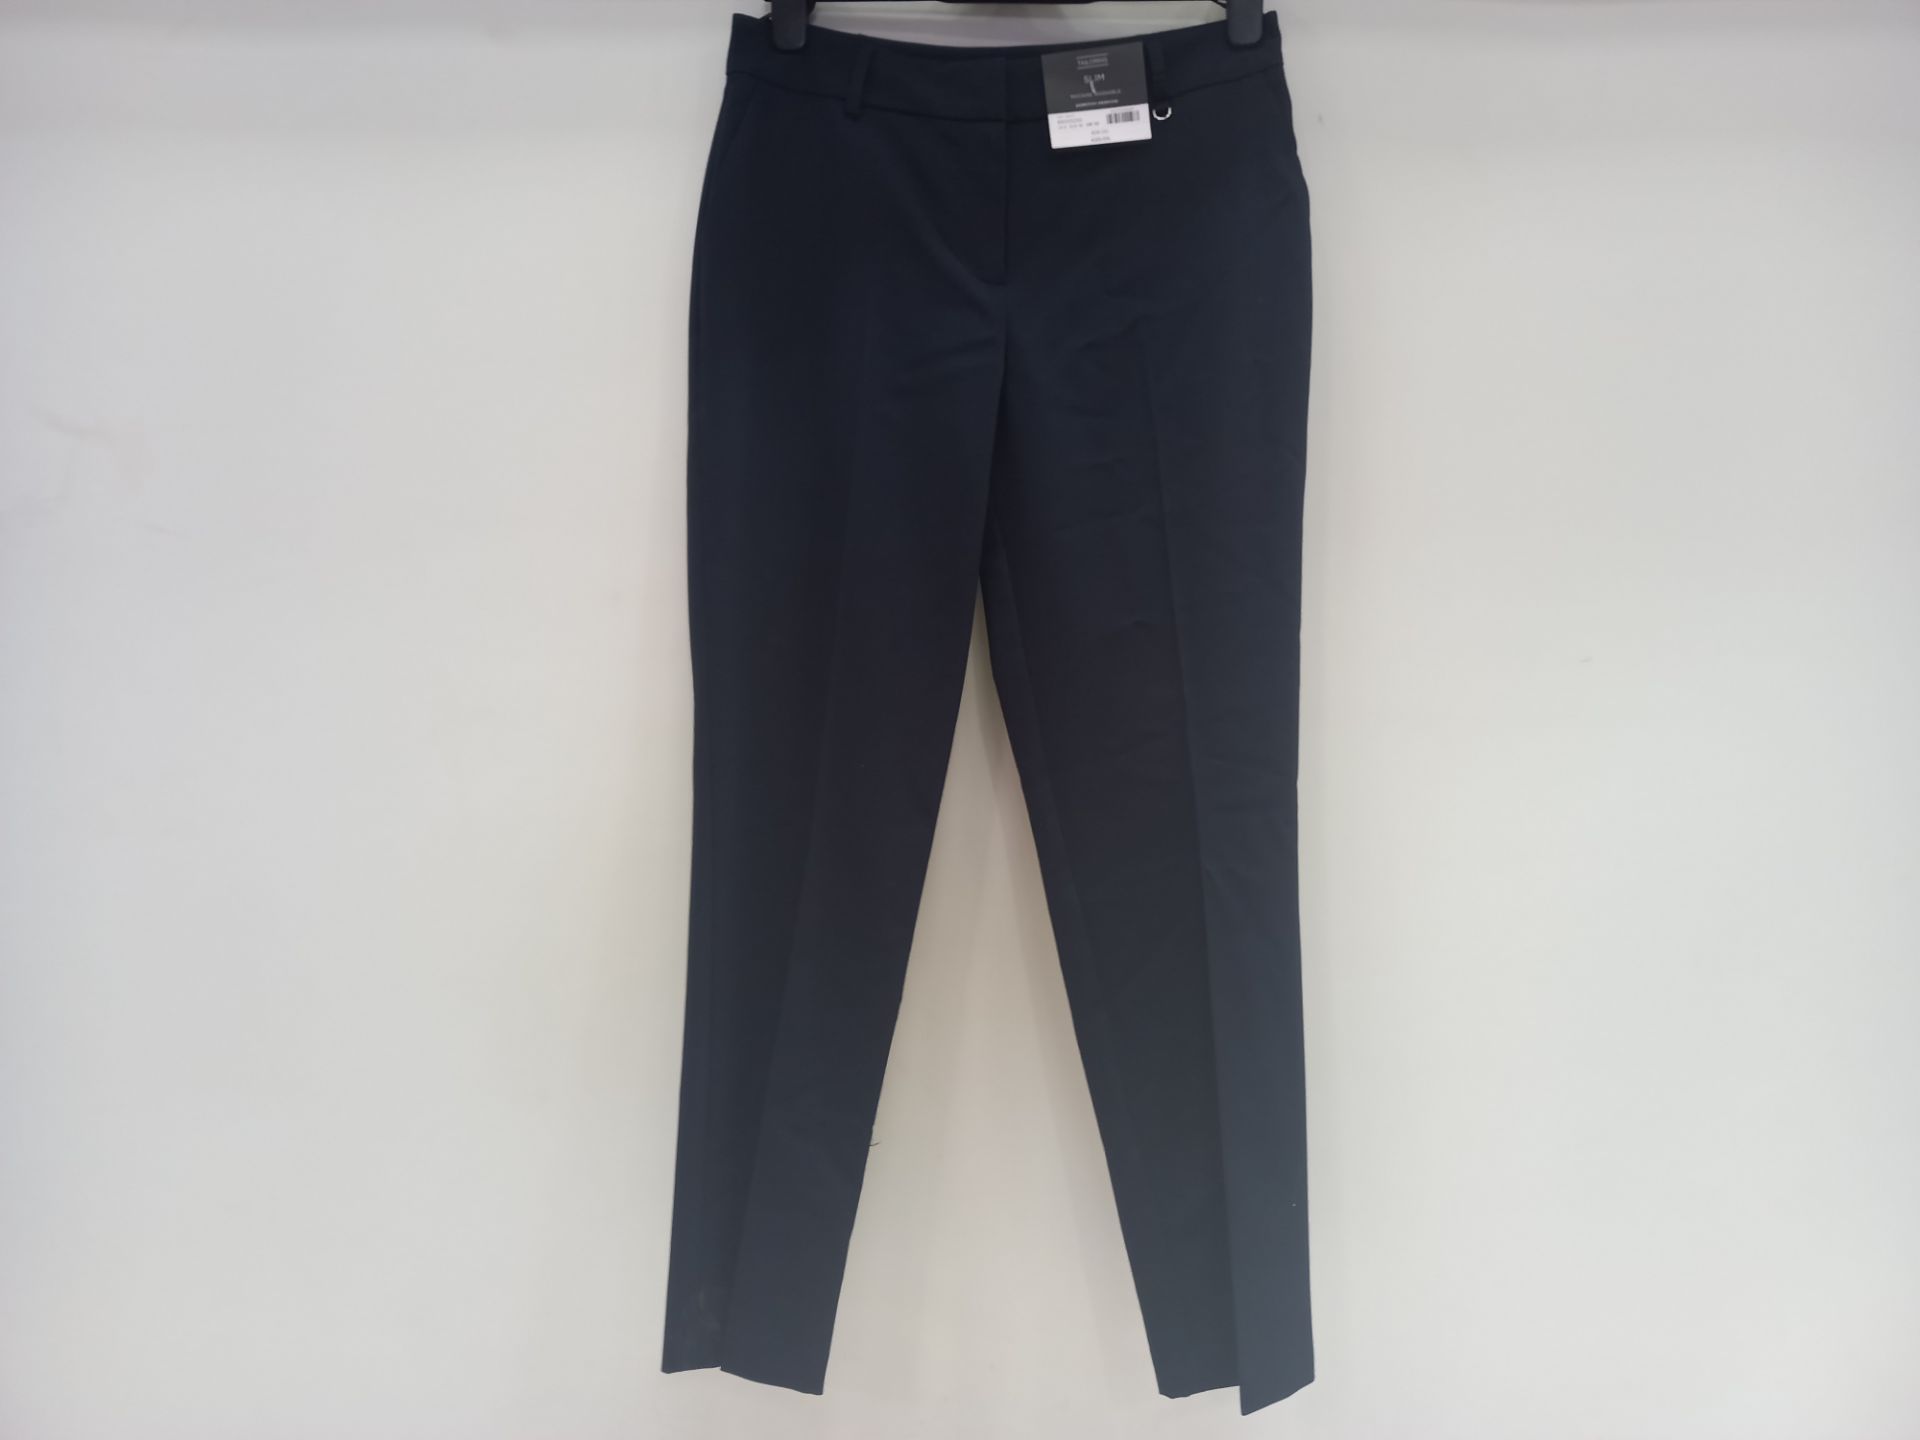 15 X BRAND NEW DOROTHY PERKINS SLIM FIT NAVY TROUSERS IN VARIOUS SIZES RRP £20.00 (TOTAL RRP £300.